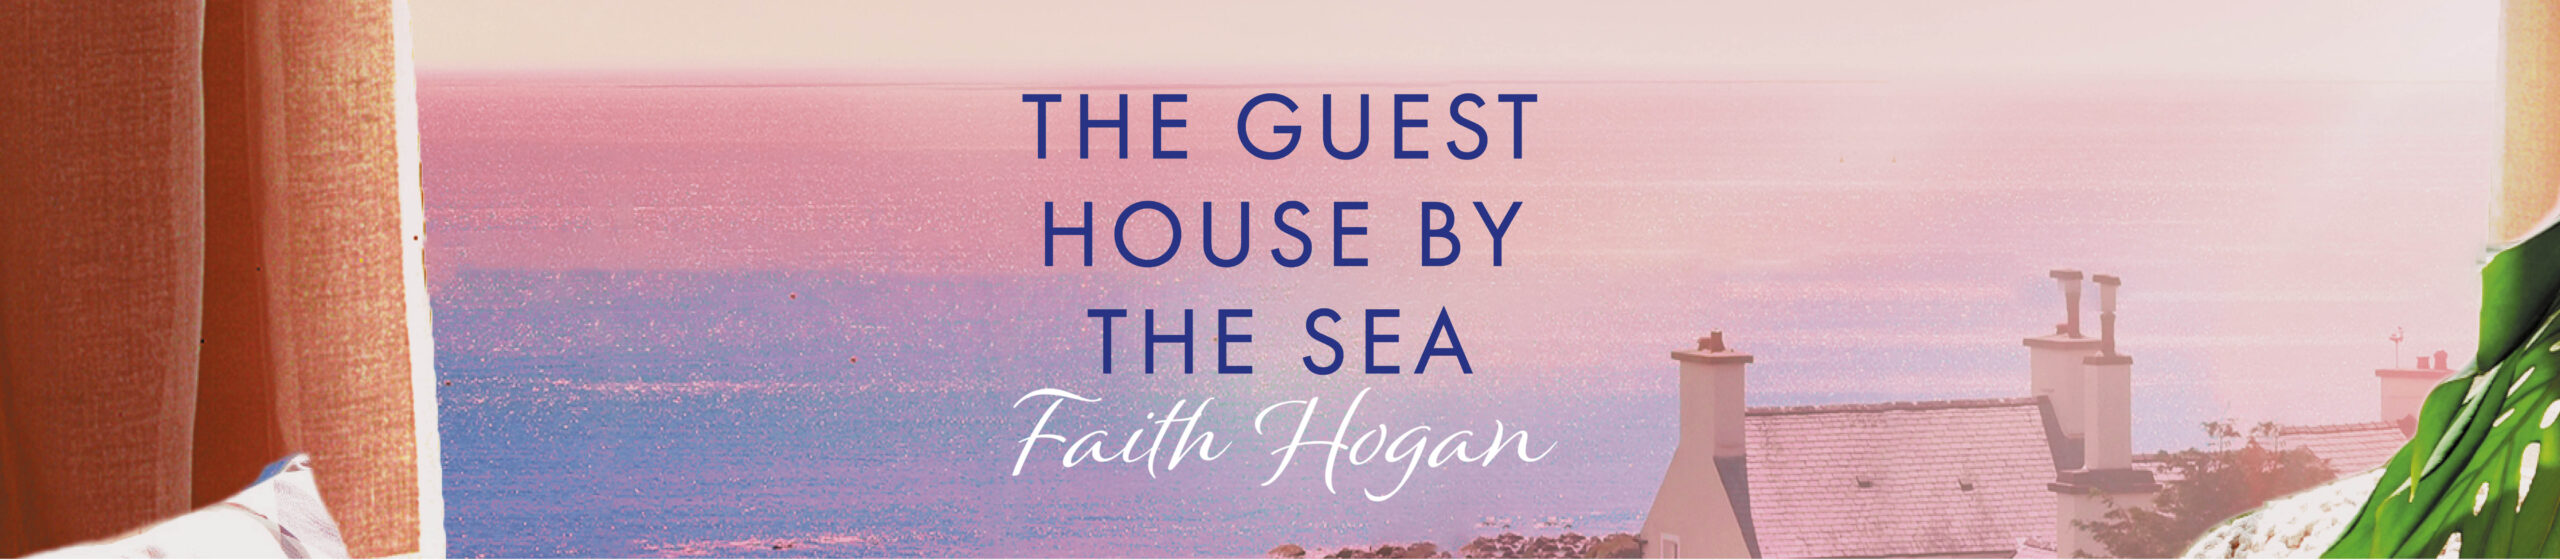 The Guest House By The Sea is on offer now!